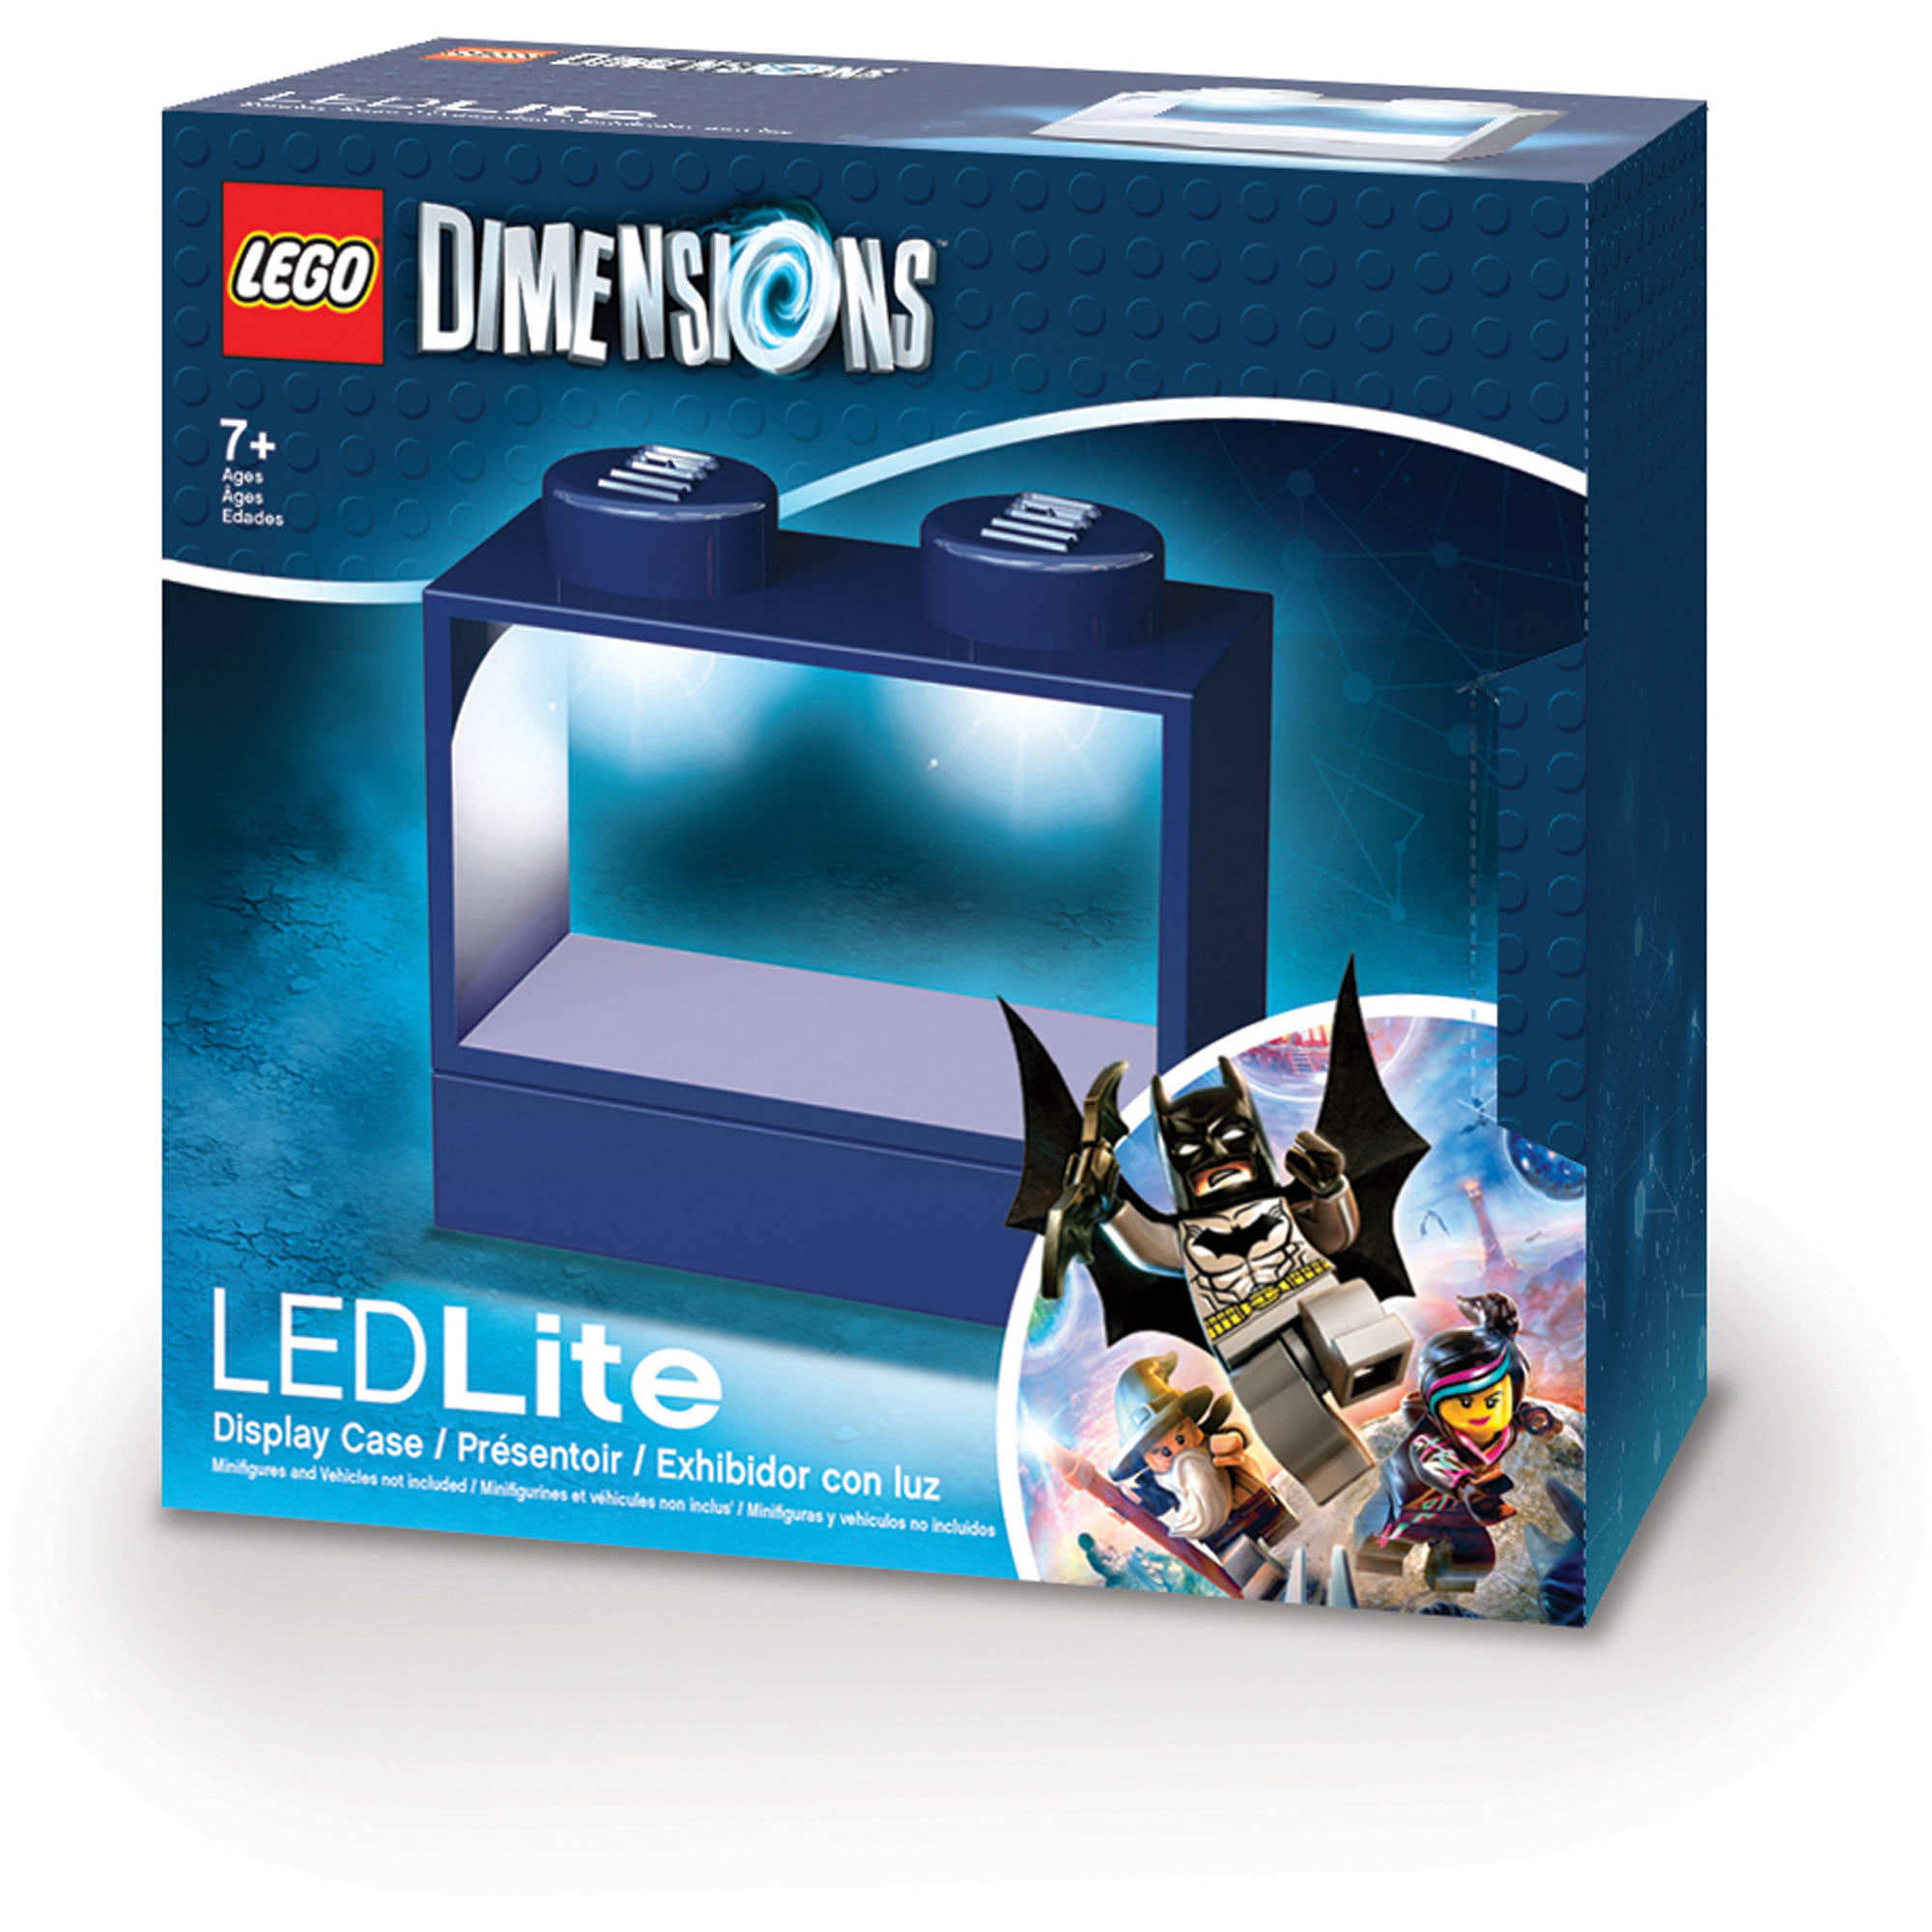 Lego Dimensions mini figures LED lite Display Case Block case tested workng 